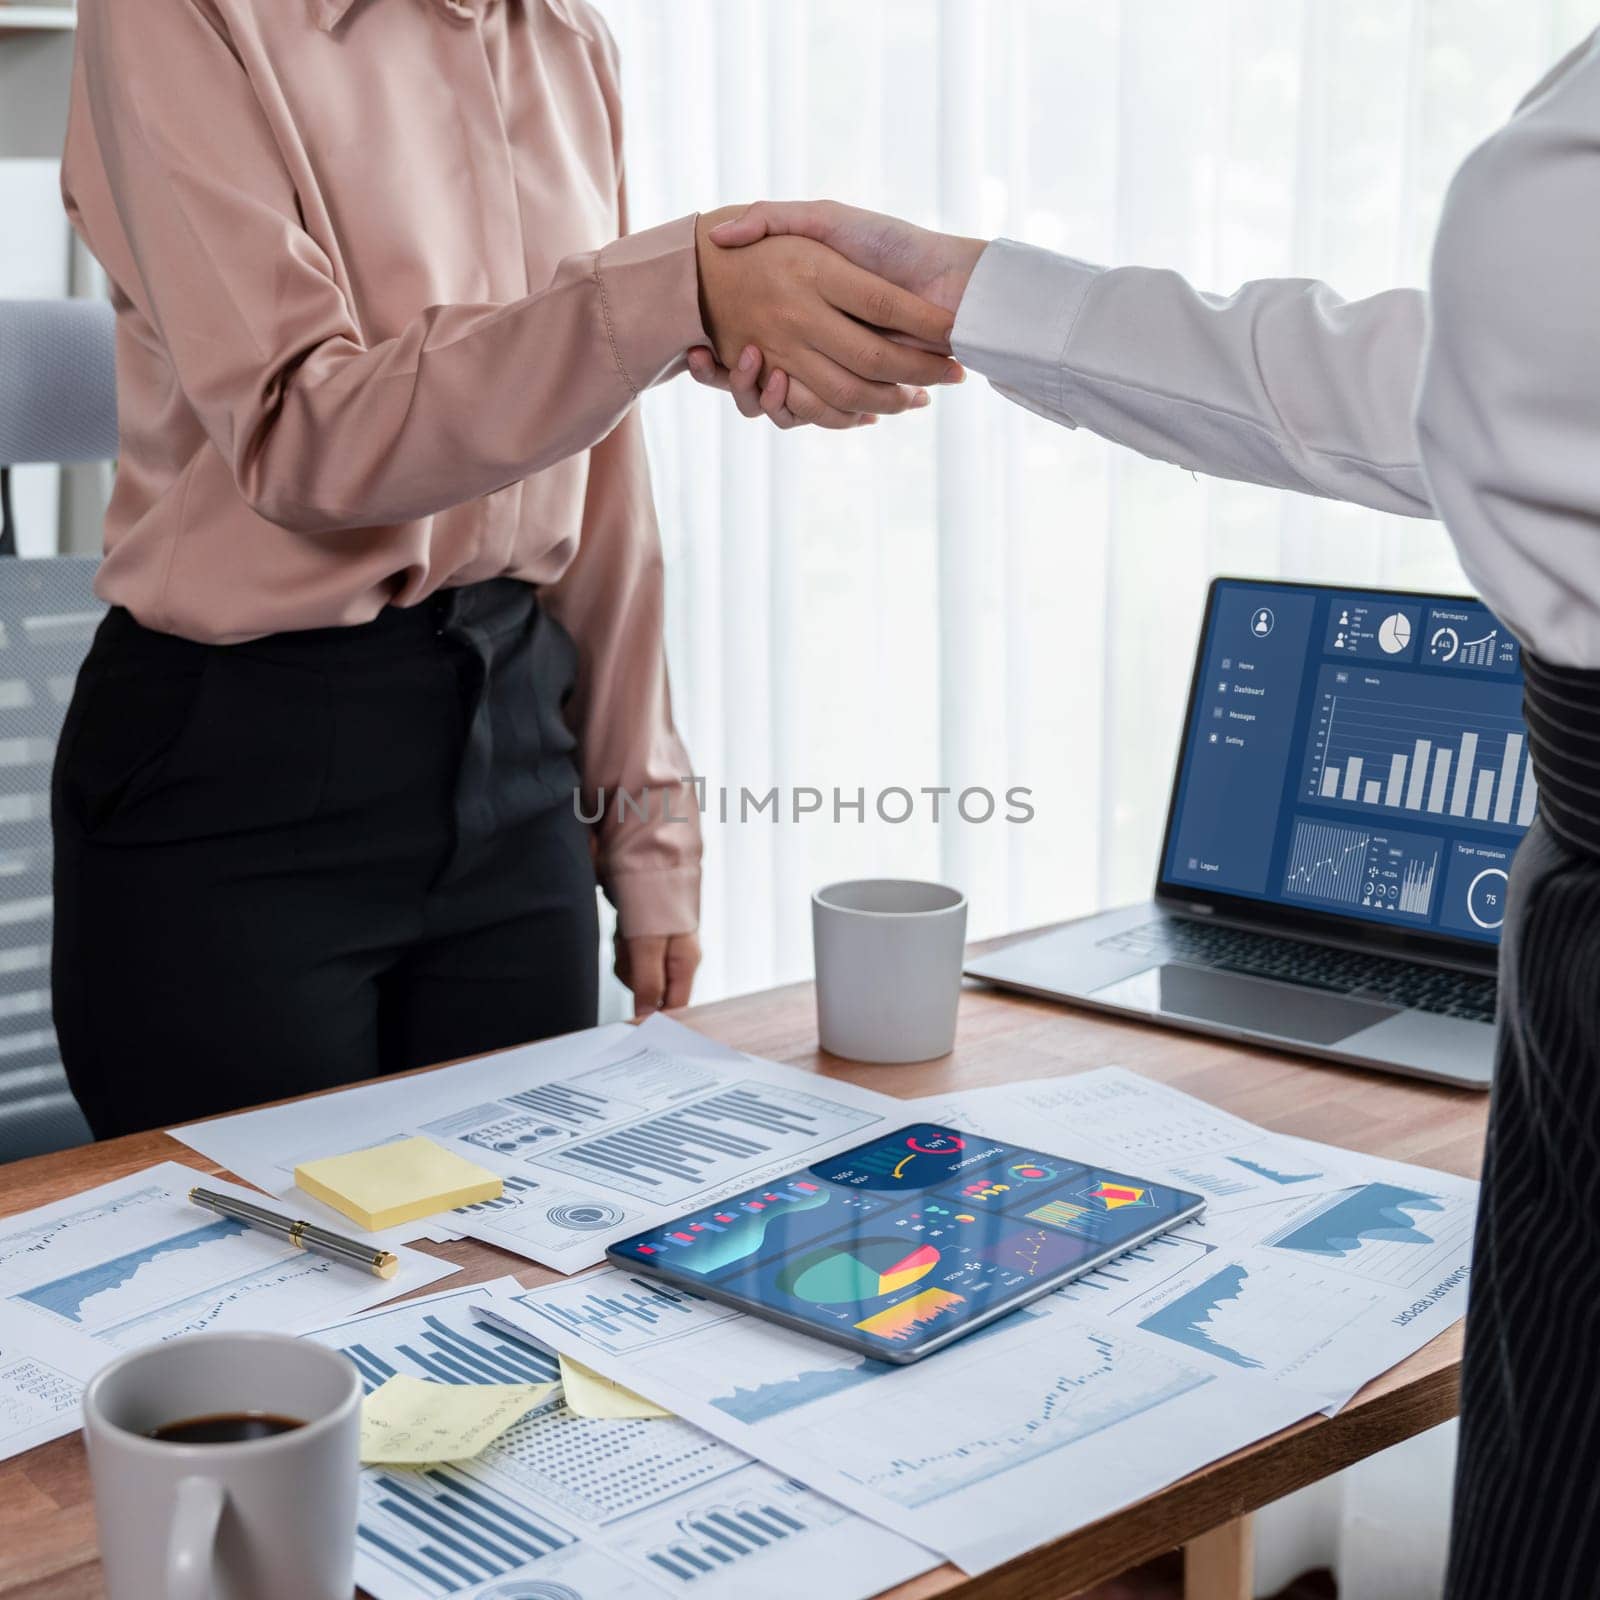 Two Asian businesswomen shaking hands in modern office after successfully analyzing piles of dashboard data papers, as importance of teamwork and integrity in the workplace concept. Enthusiastic